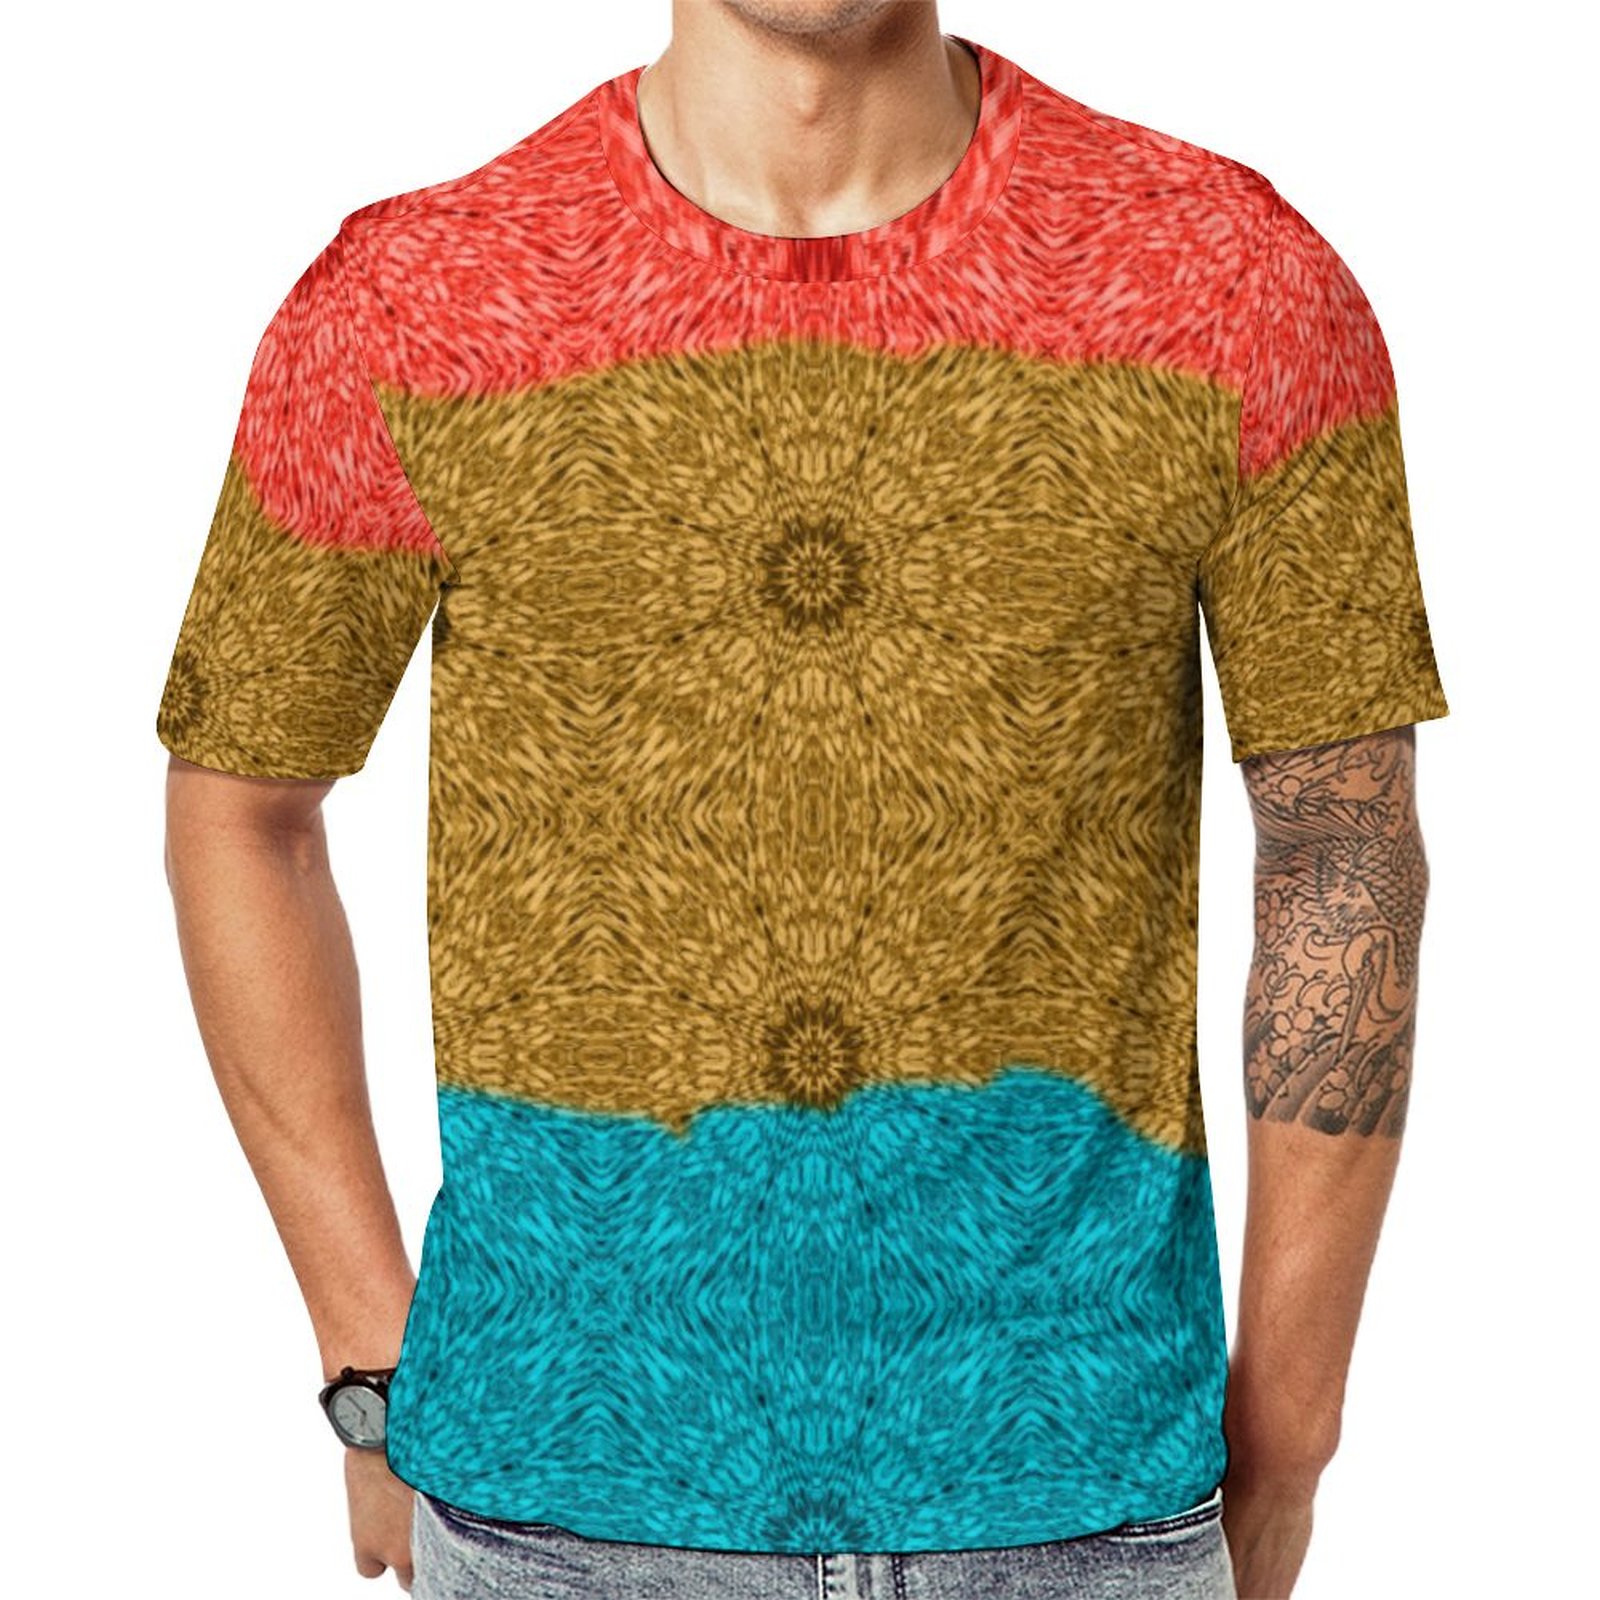 Mandala Coral Amber Turquoise Short Sleeve Print Unisex Tshirt Summer Casual Tees for Men and Women Coolcoshirts